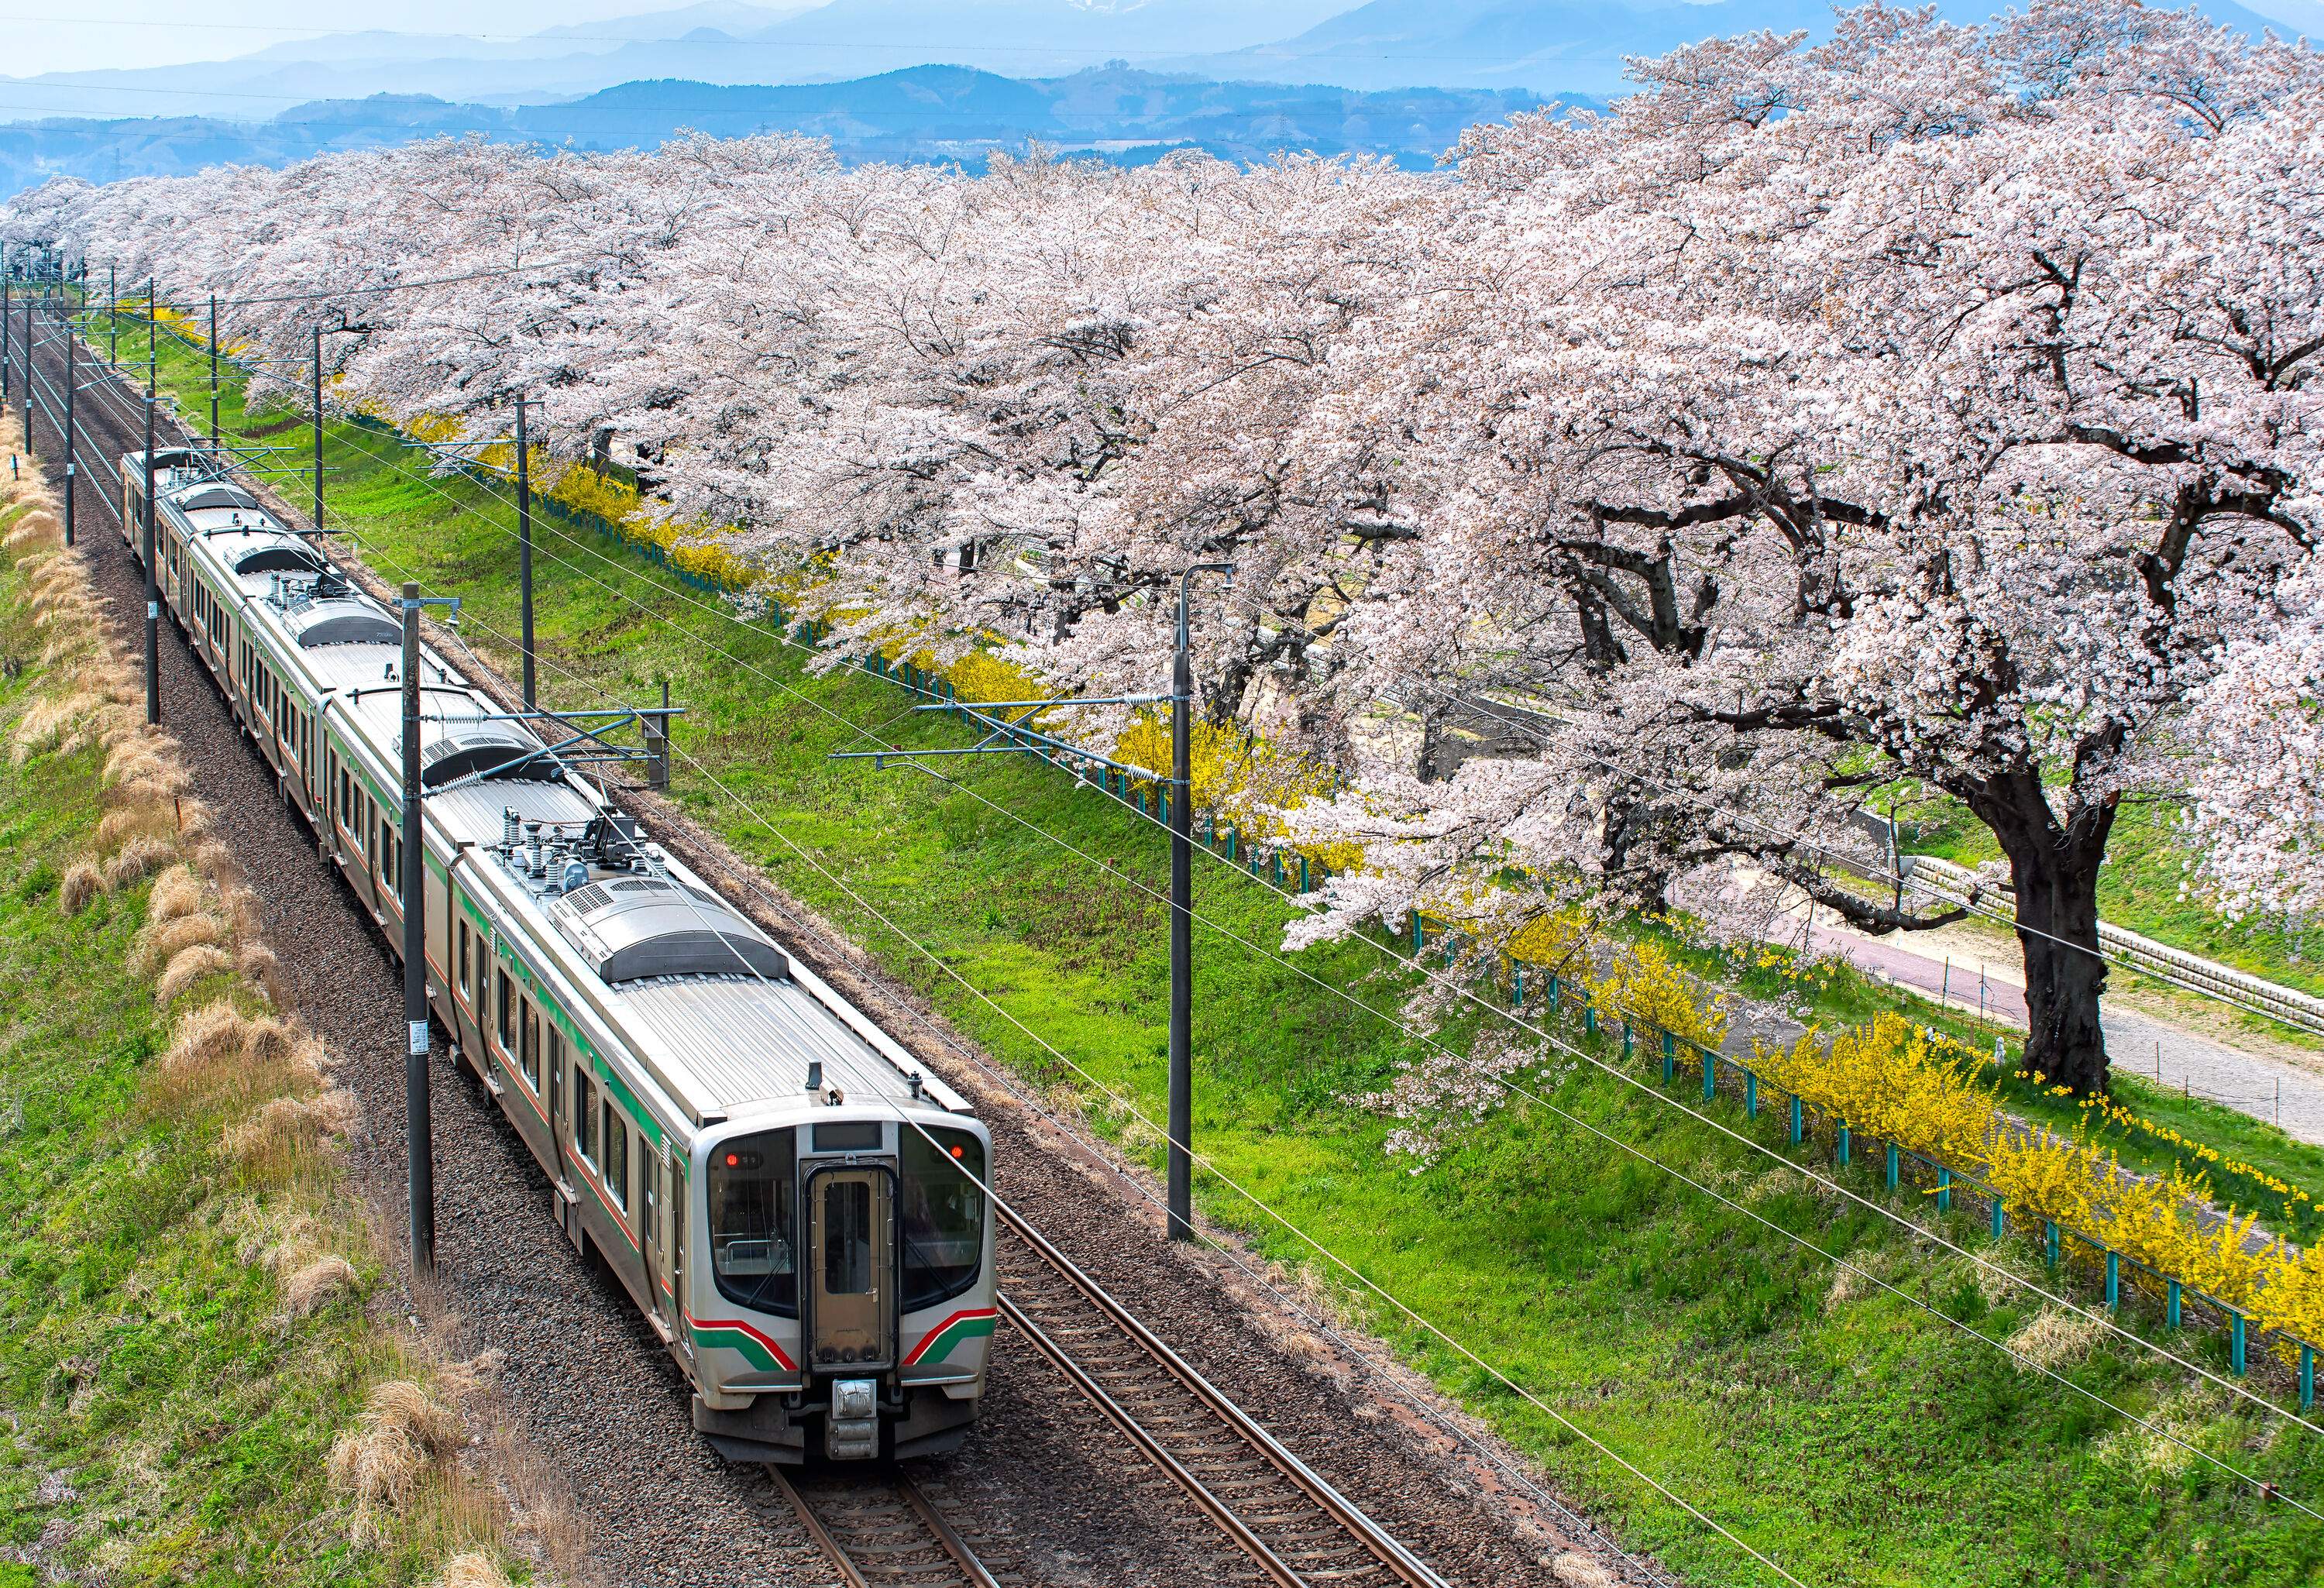 A train running on a railway track lined with cherry blossom trees.